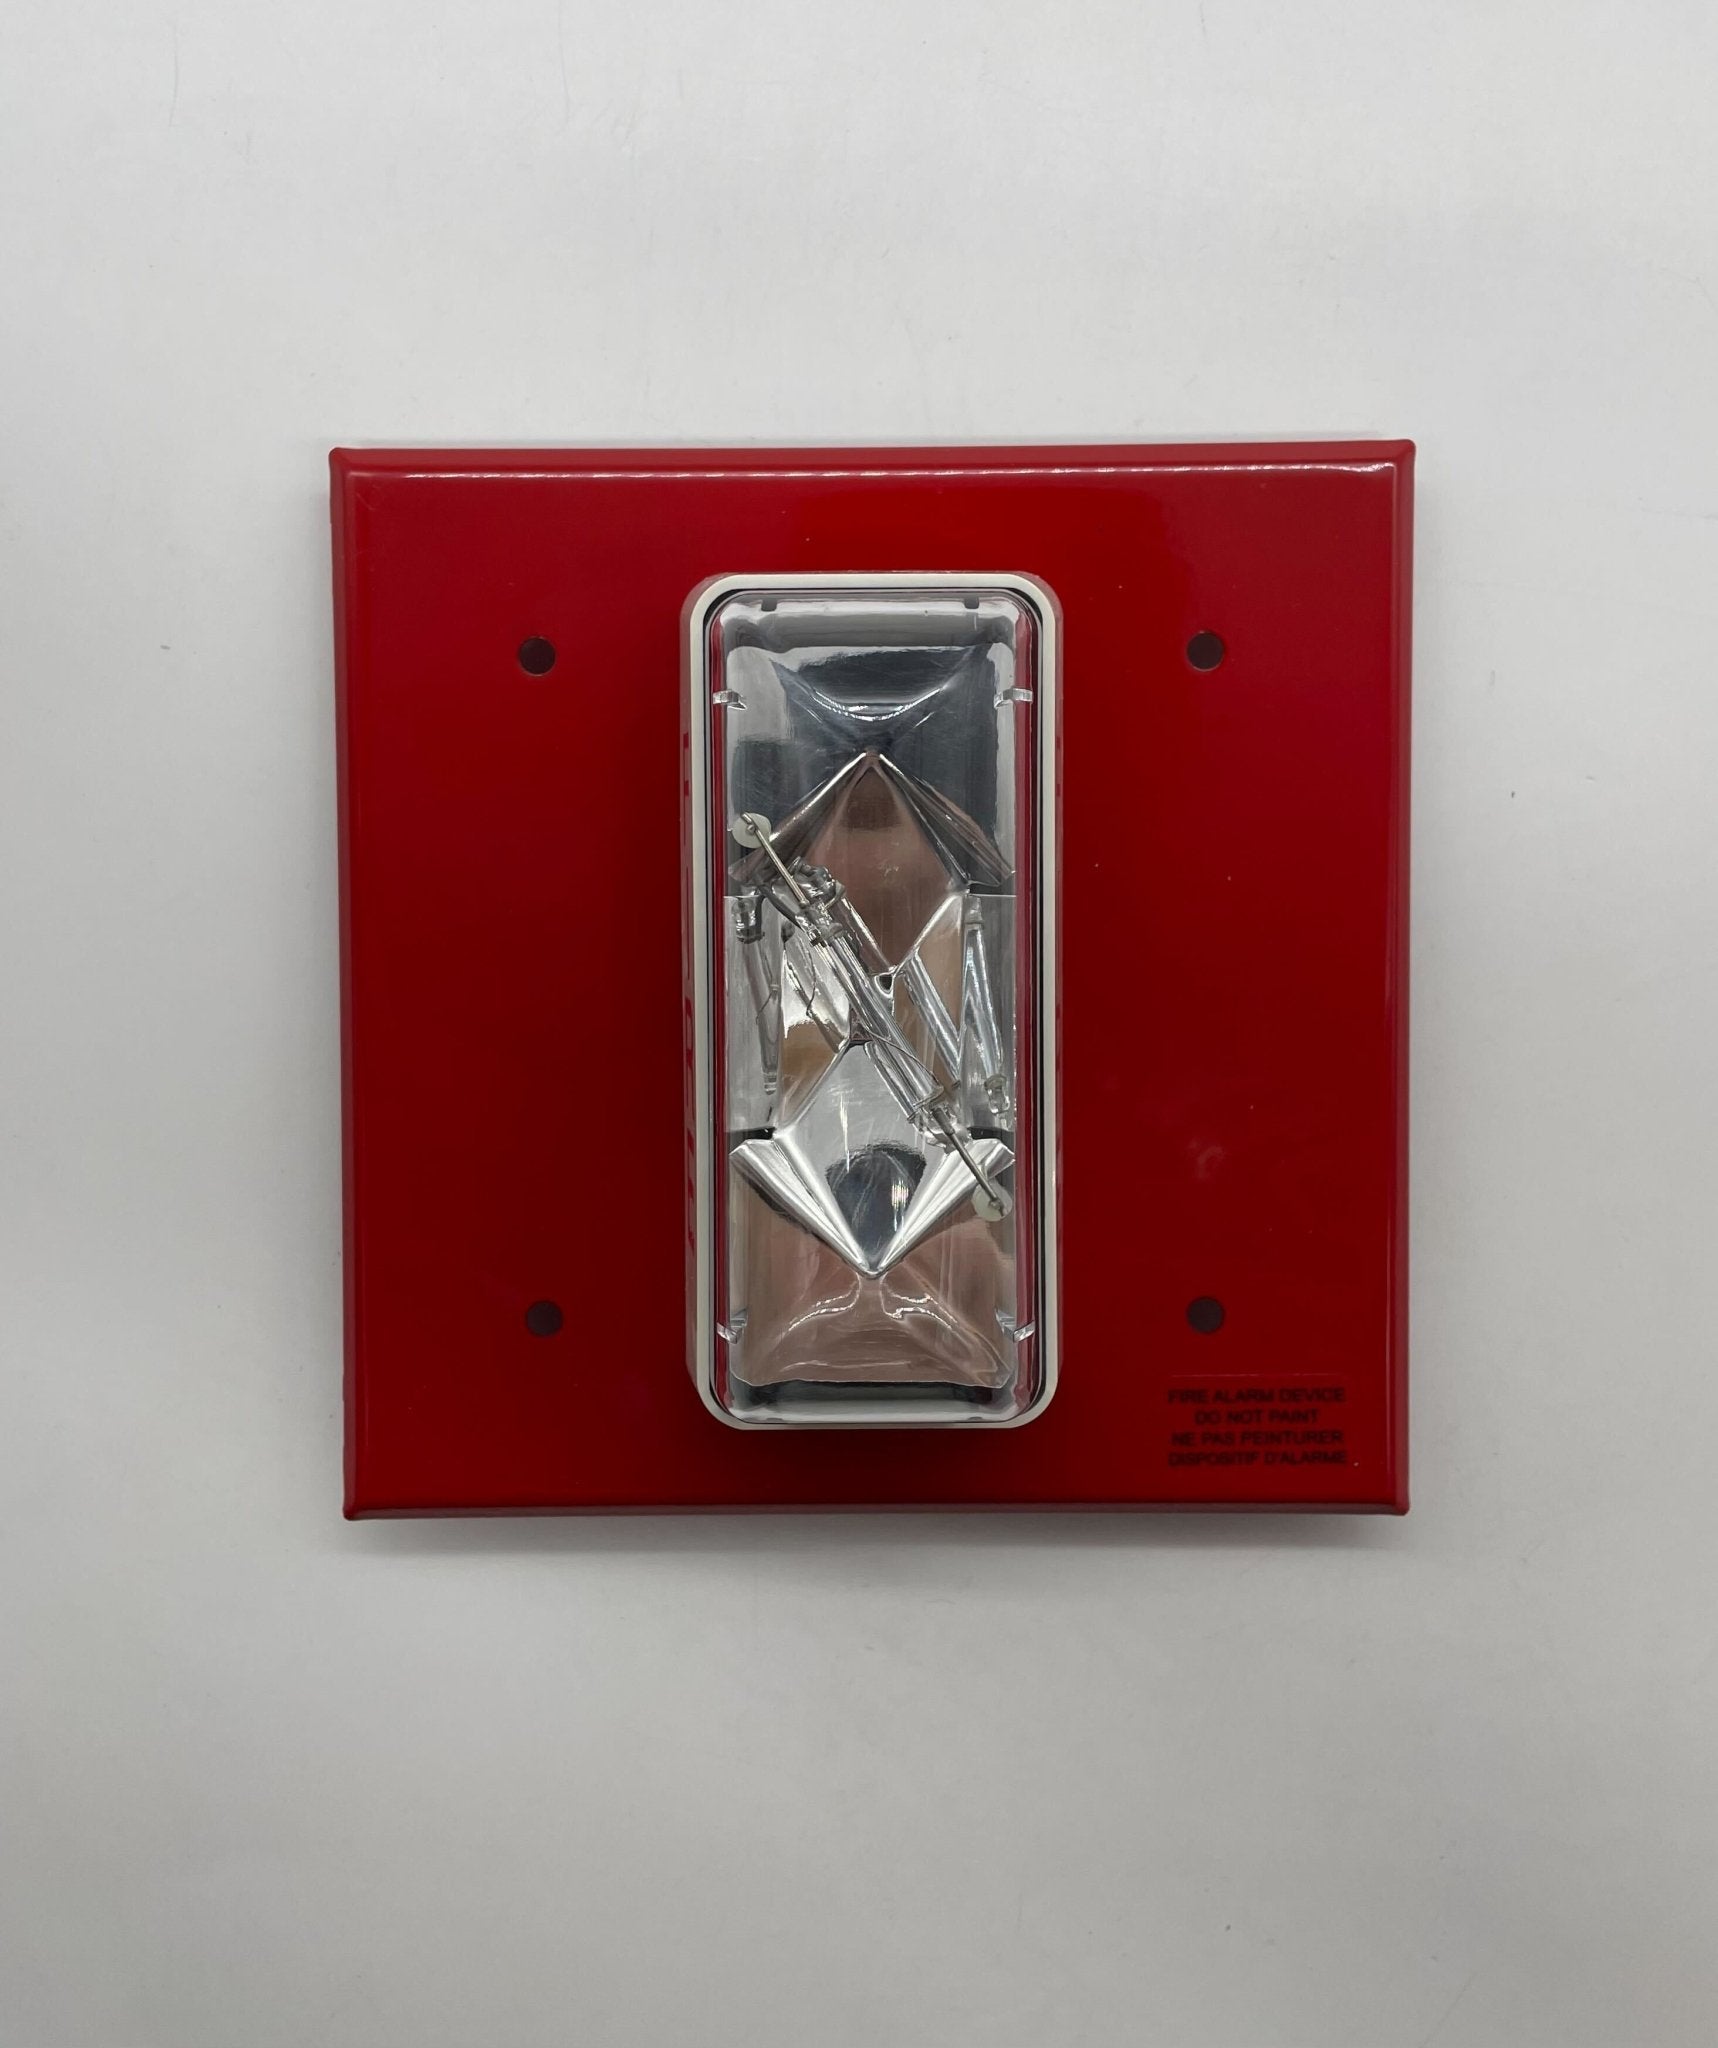 Edwards 405-7A-T - The Fire Alarm Supplier